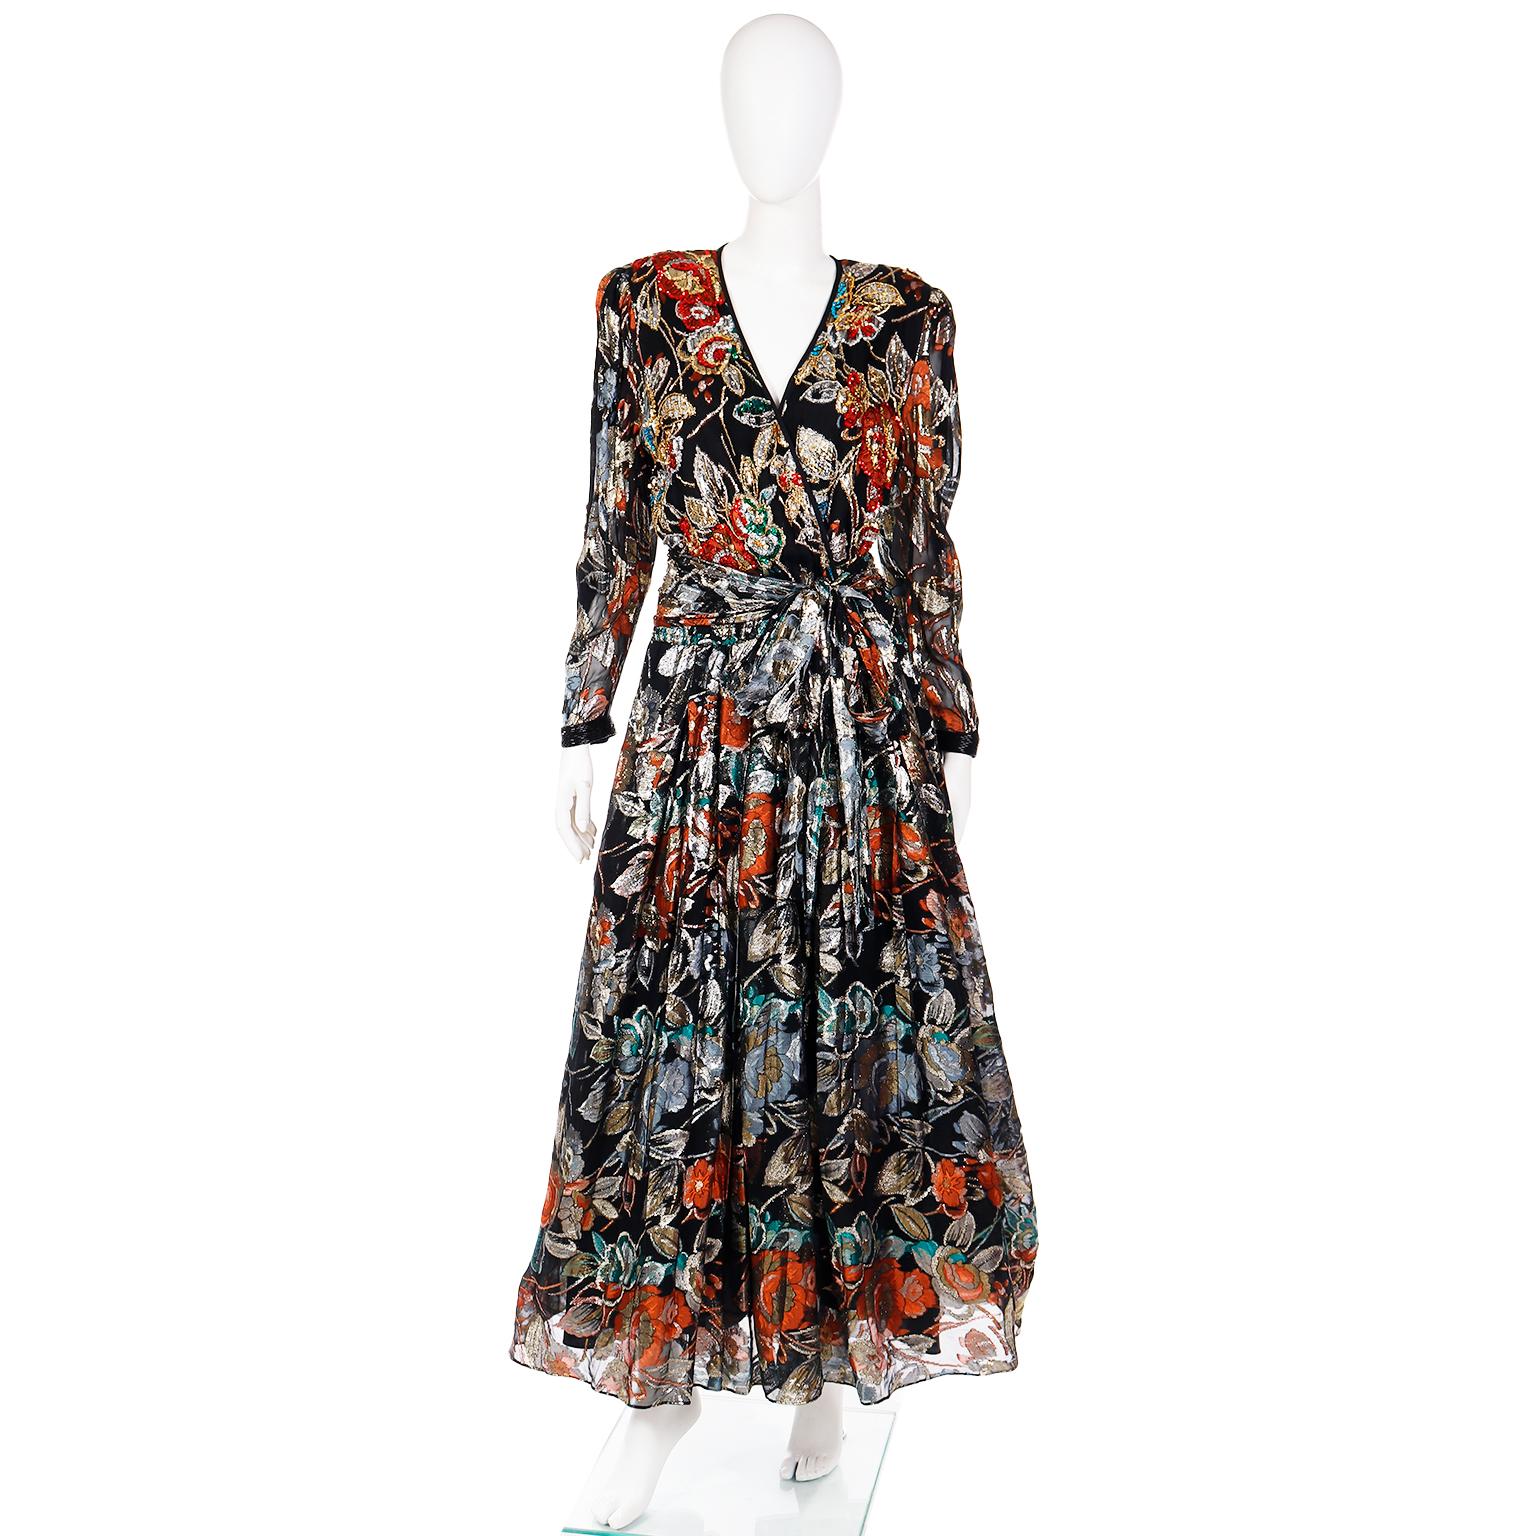 This is a stunning vintage Diane Freis vintage abstract floral dress with beading, and sequins. The dress is in luxe shades of gold, bronze, silver, red, turquoise, slate blue, peacock blue, and green, with metallic threads giving it even more